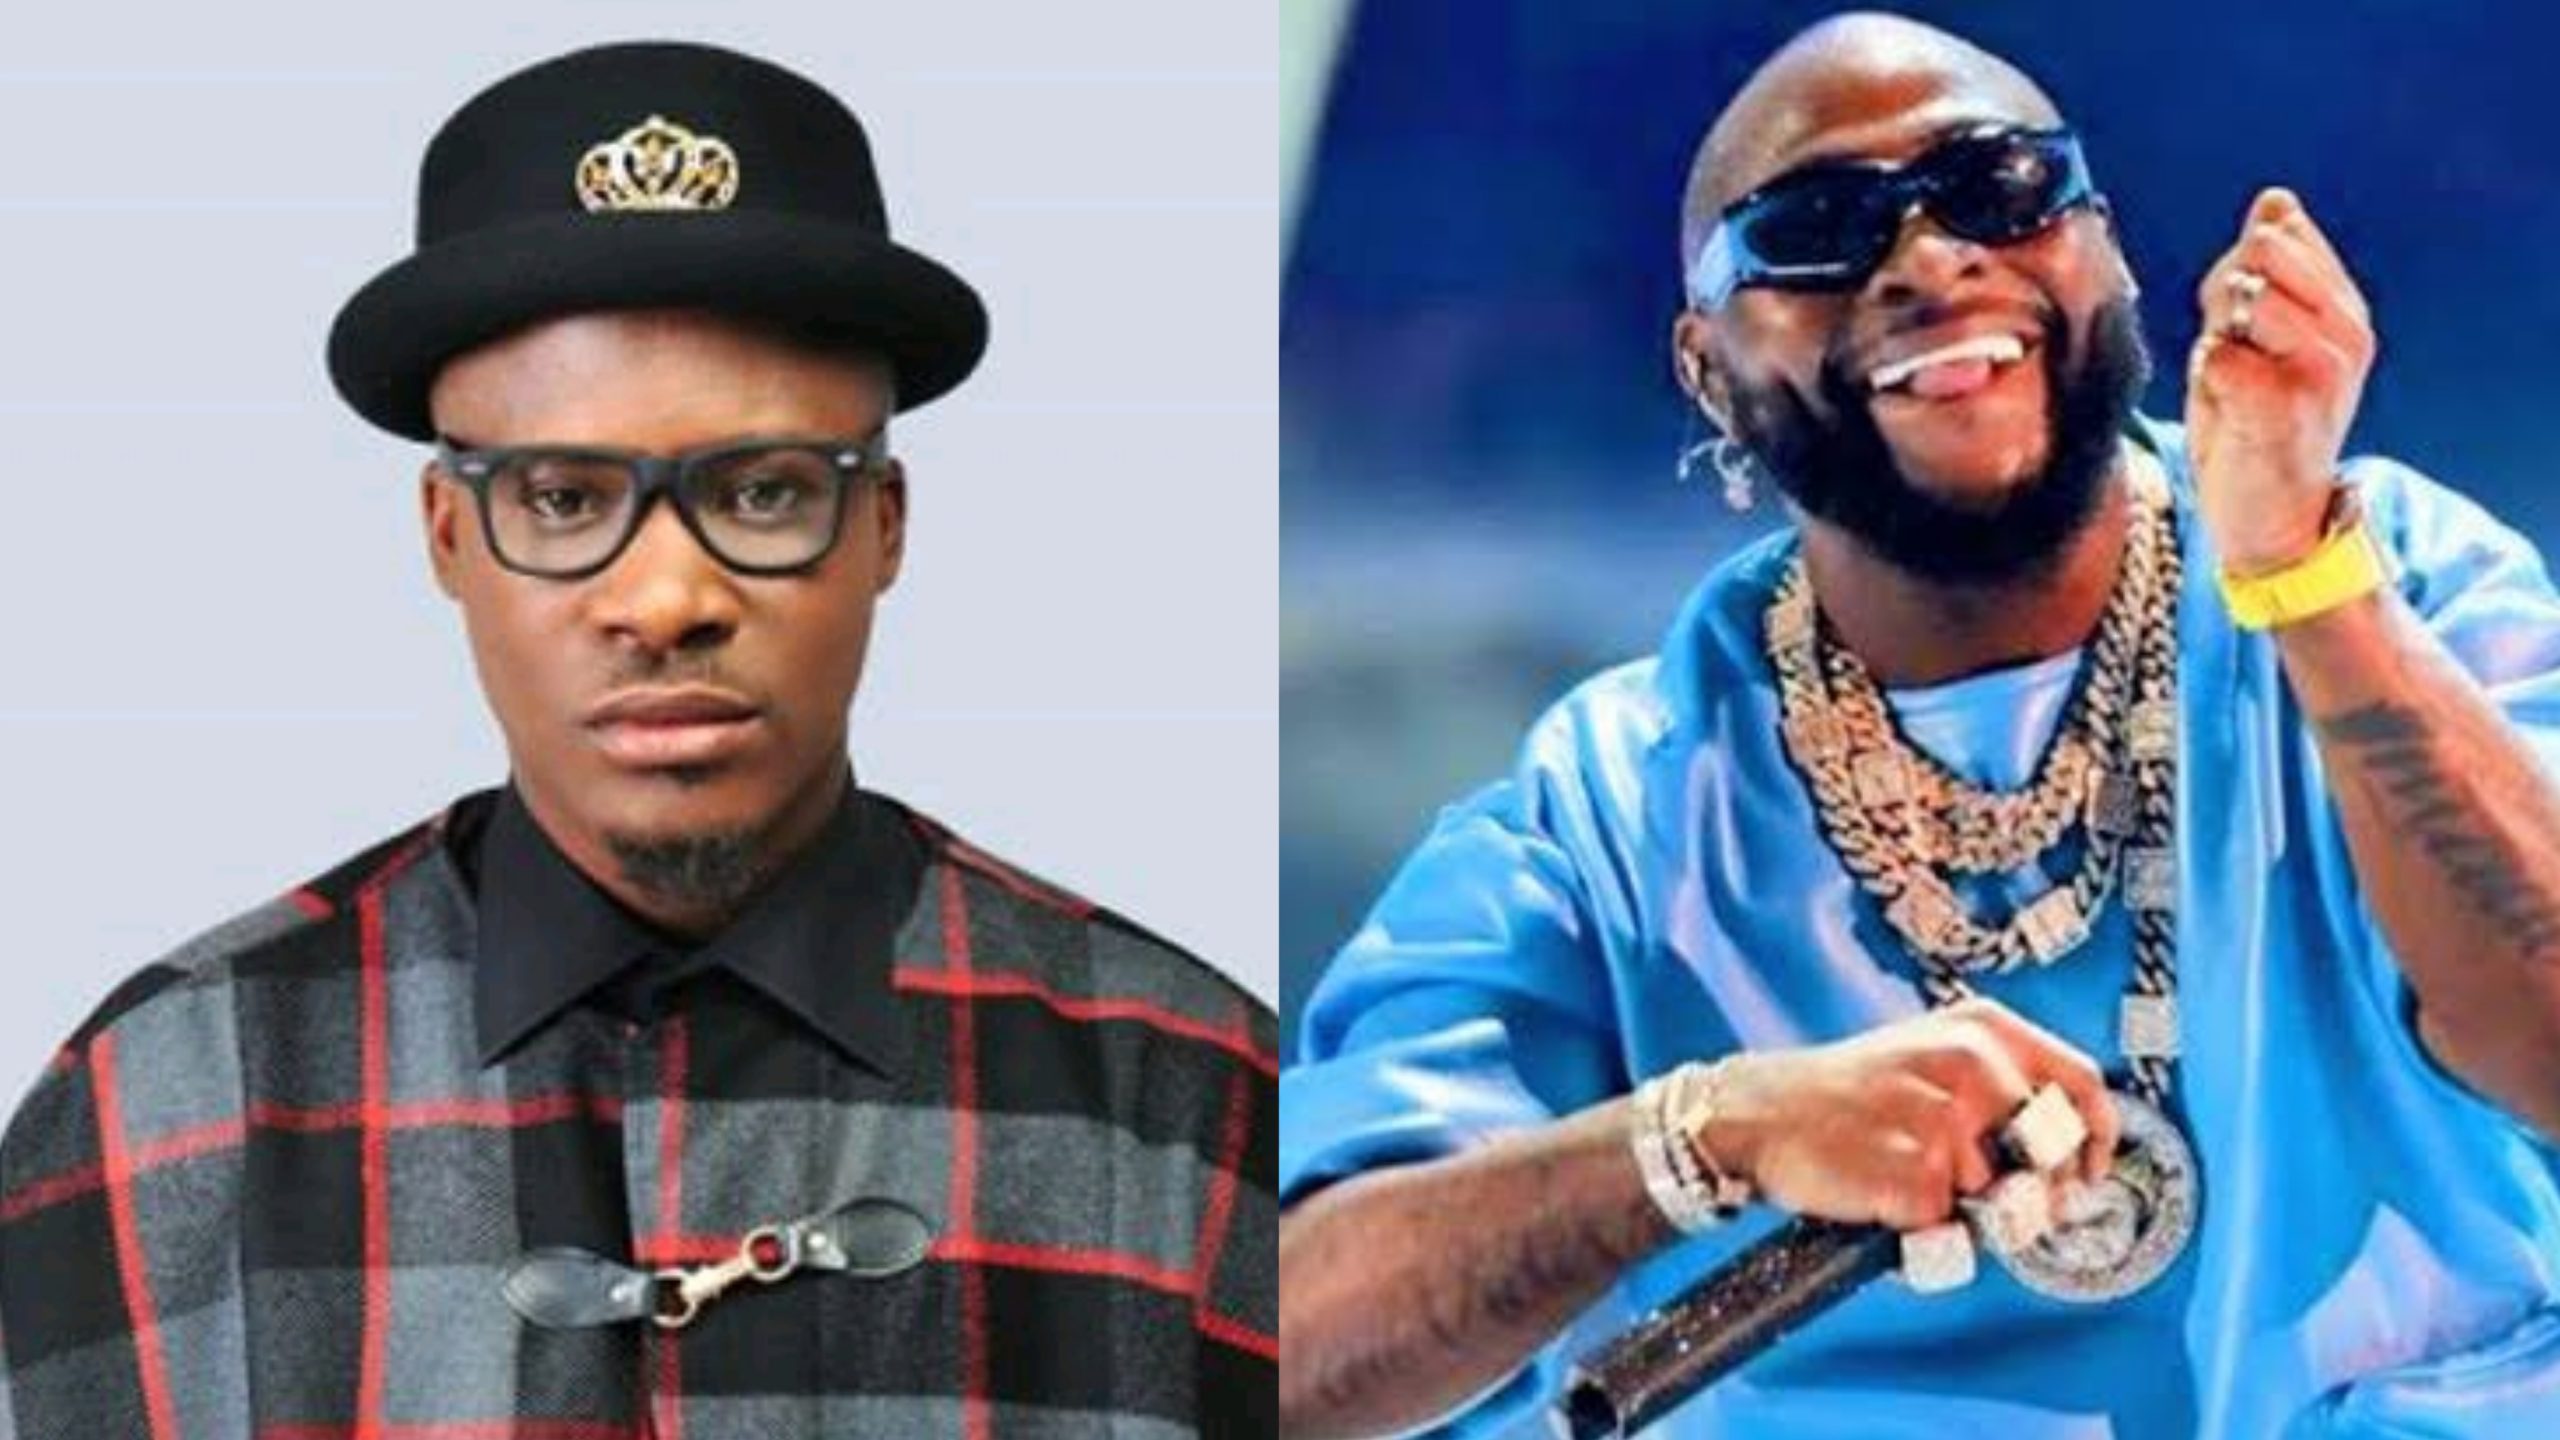 "Davido is the most supportive Nigerian artiste among his colleagues" – Jaywon